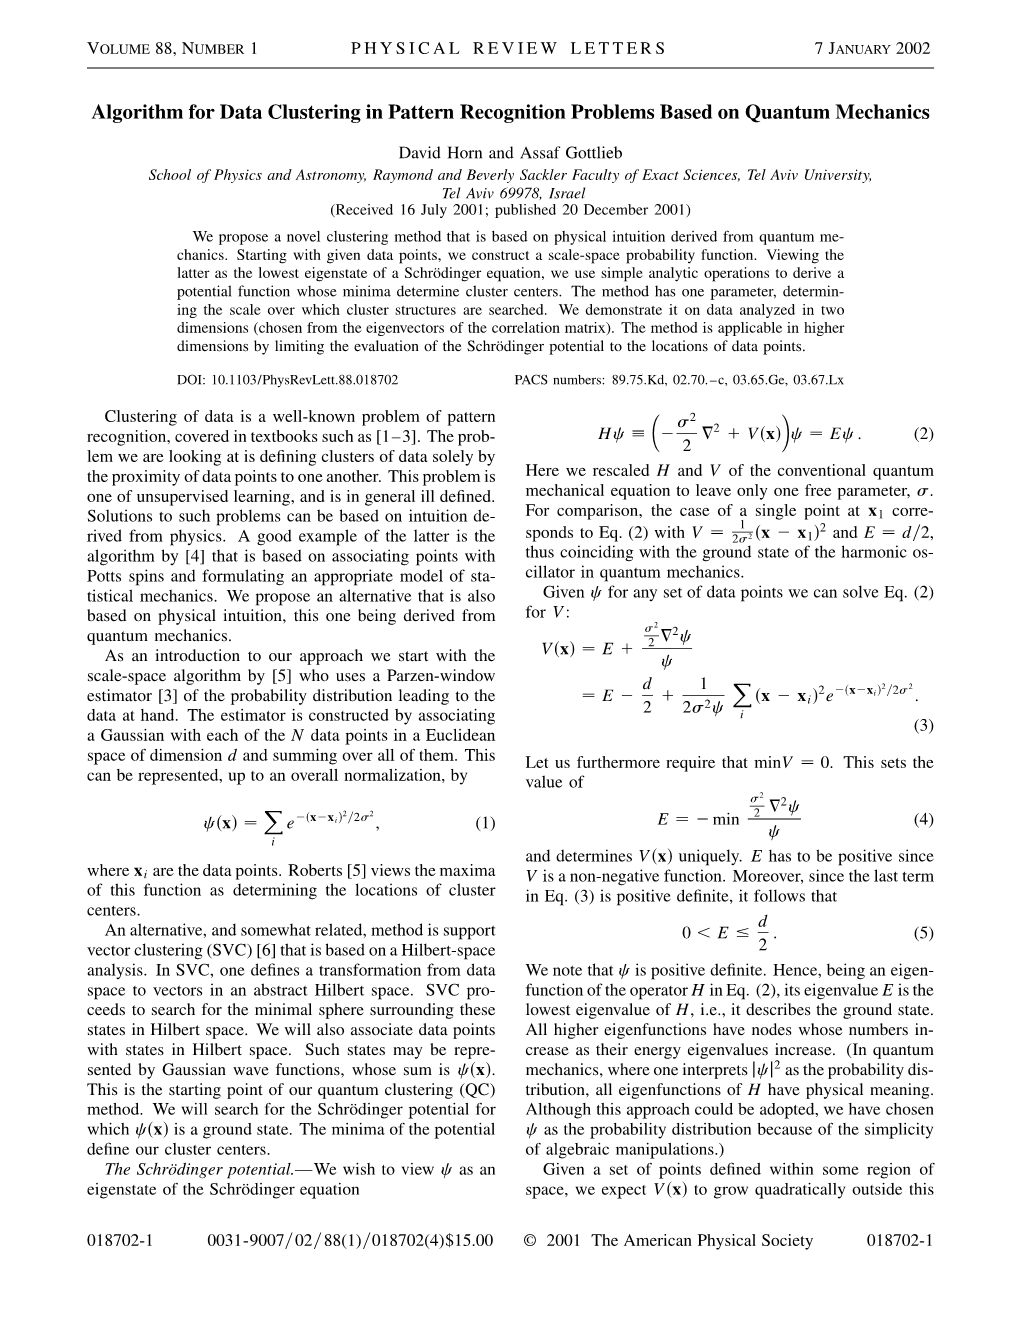 Algorithm for Data Clustering in Pattern Recognition Problems Based on Quantum Mechanics